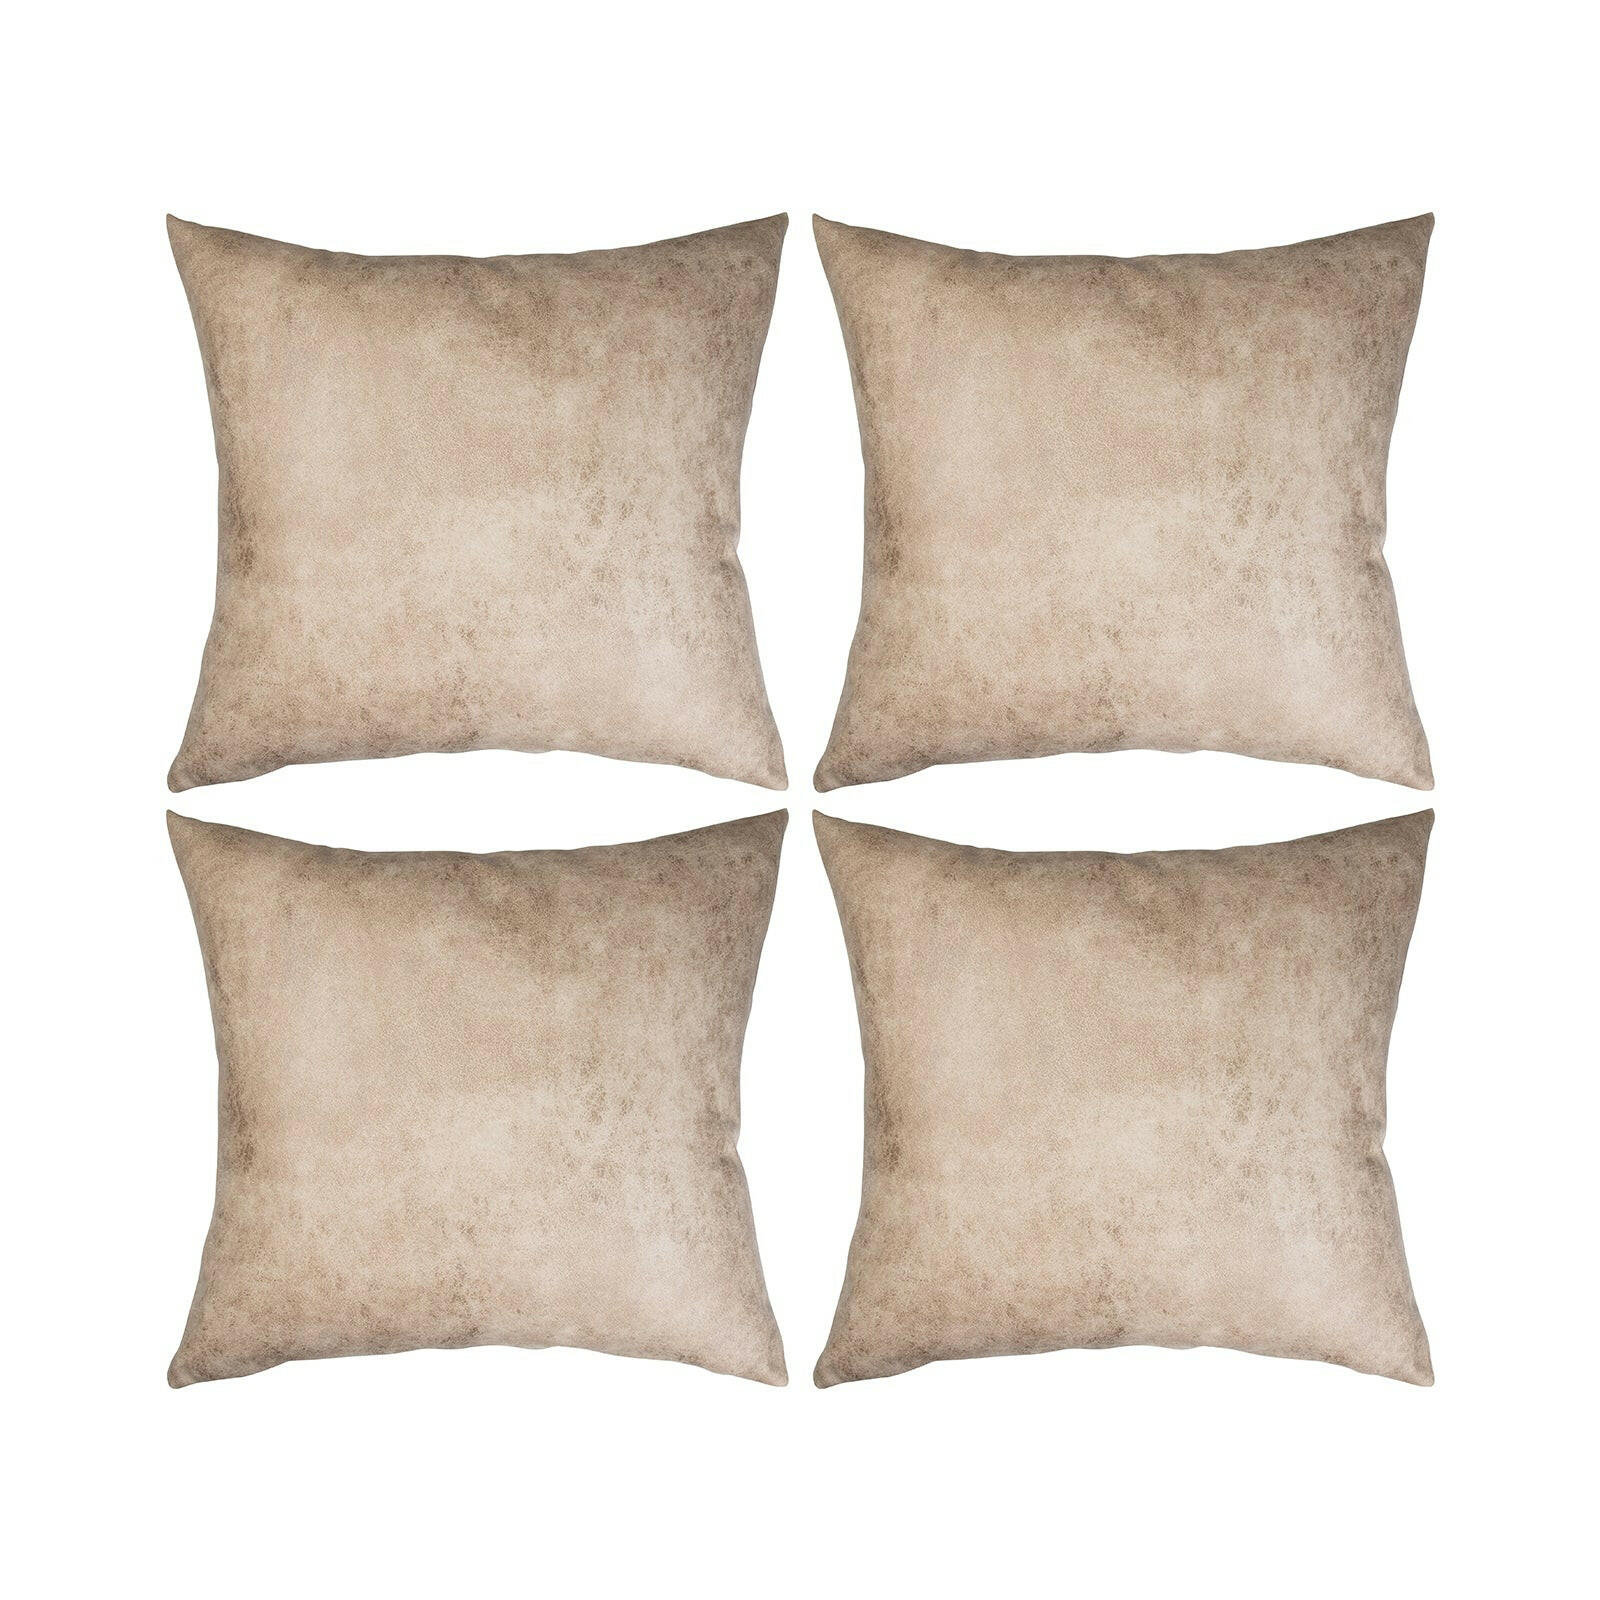 Brown Vegan Leather Sublimation Pillow Cases - 4 Pack.